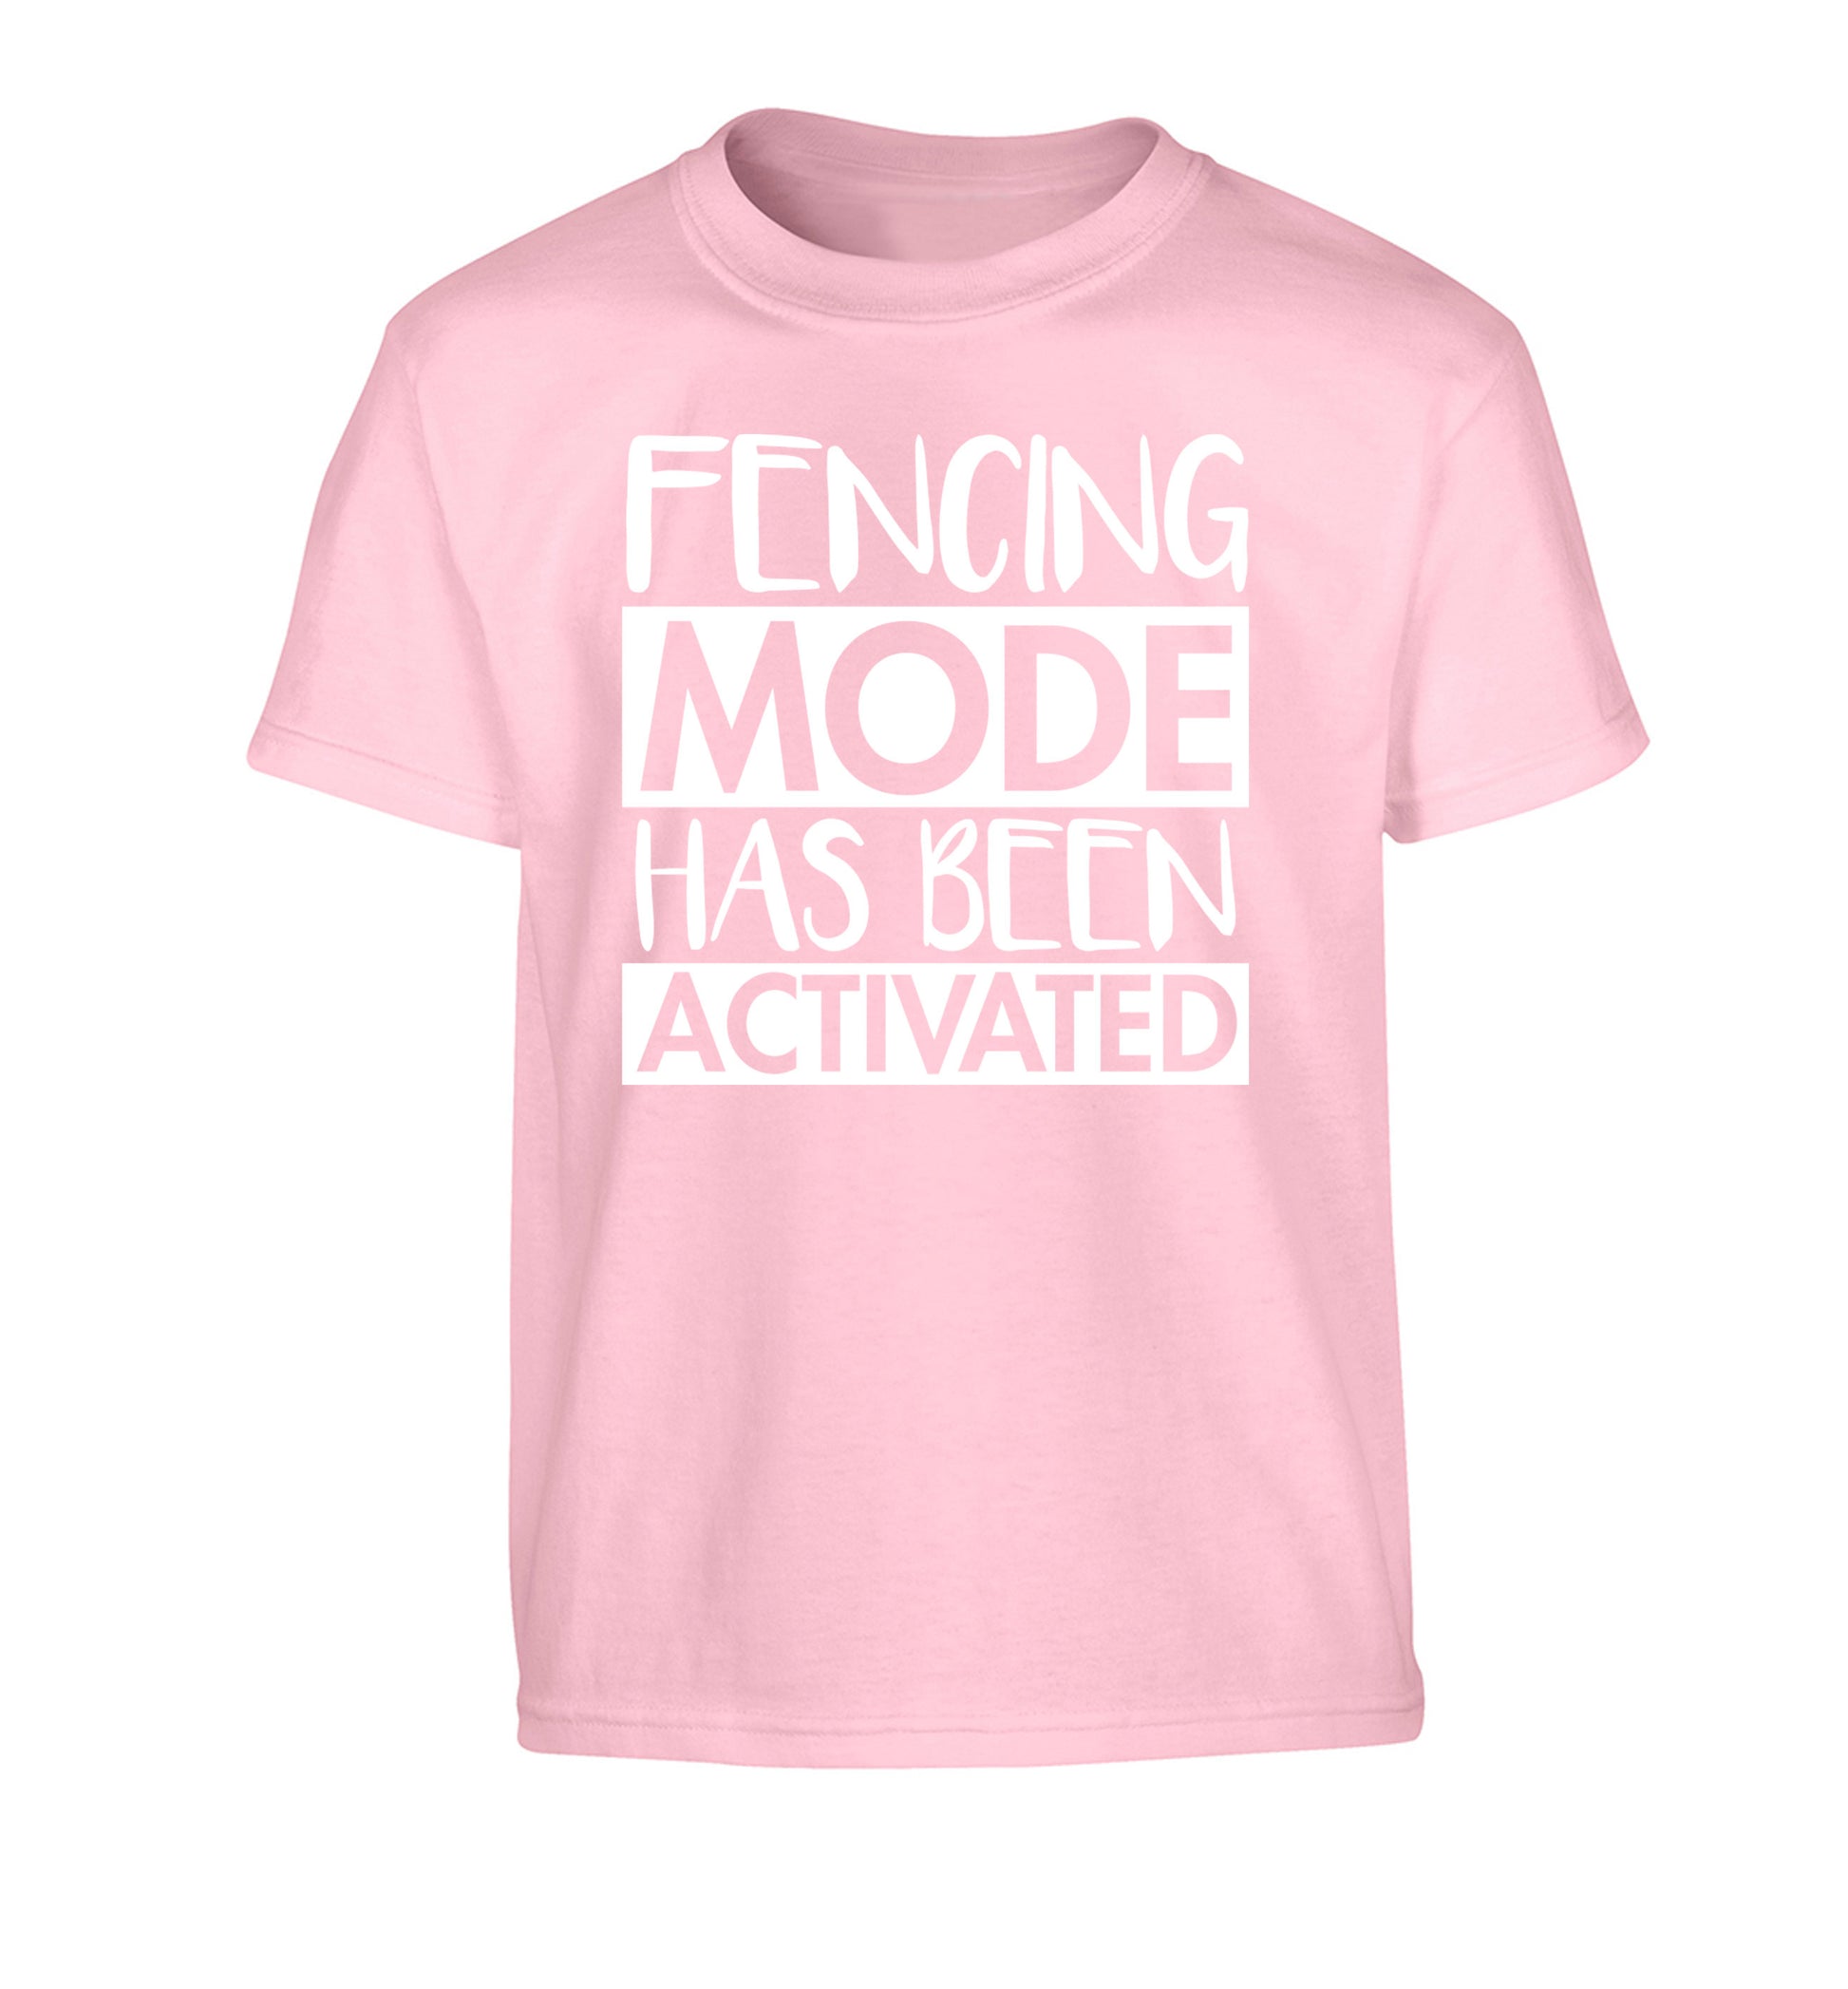 Fencing mode activated Children's light pink Tshirt 12-14 Years